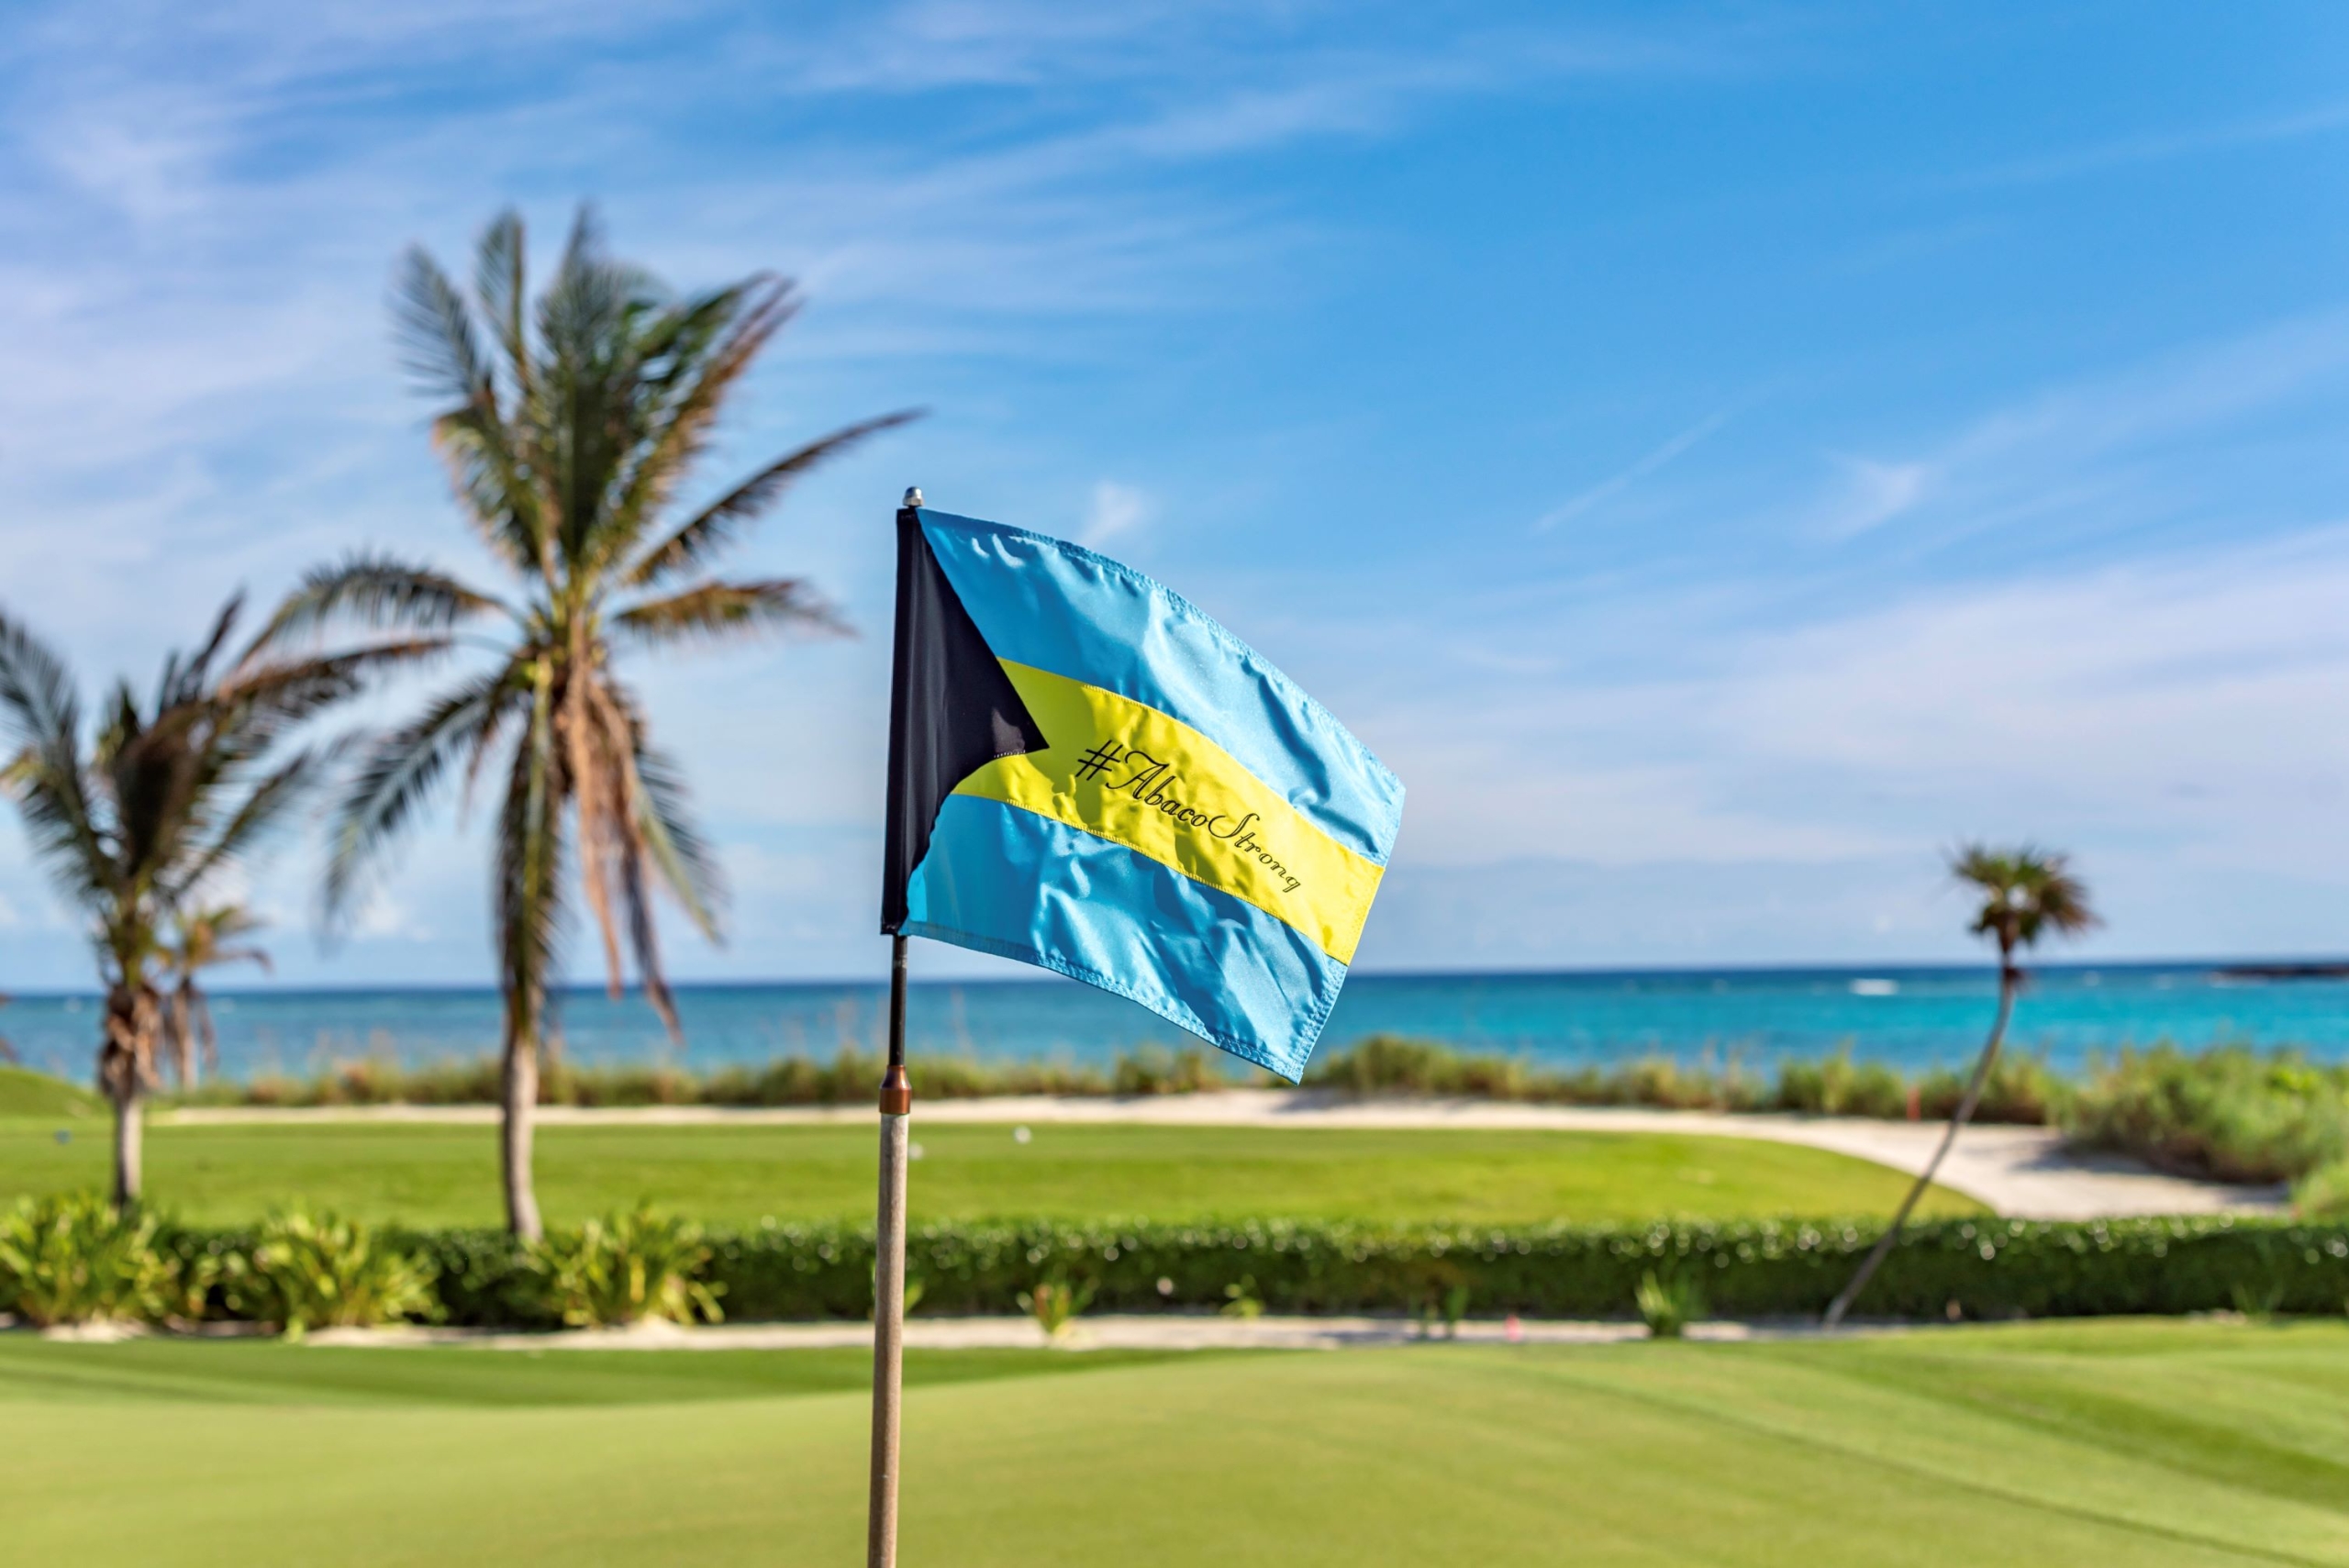 Bahamas flag image with a hashtag from The Abaco Club